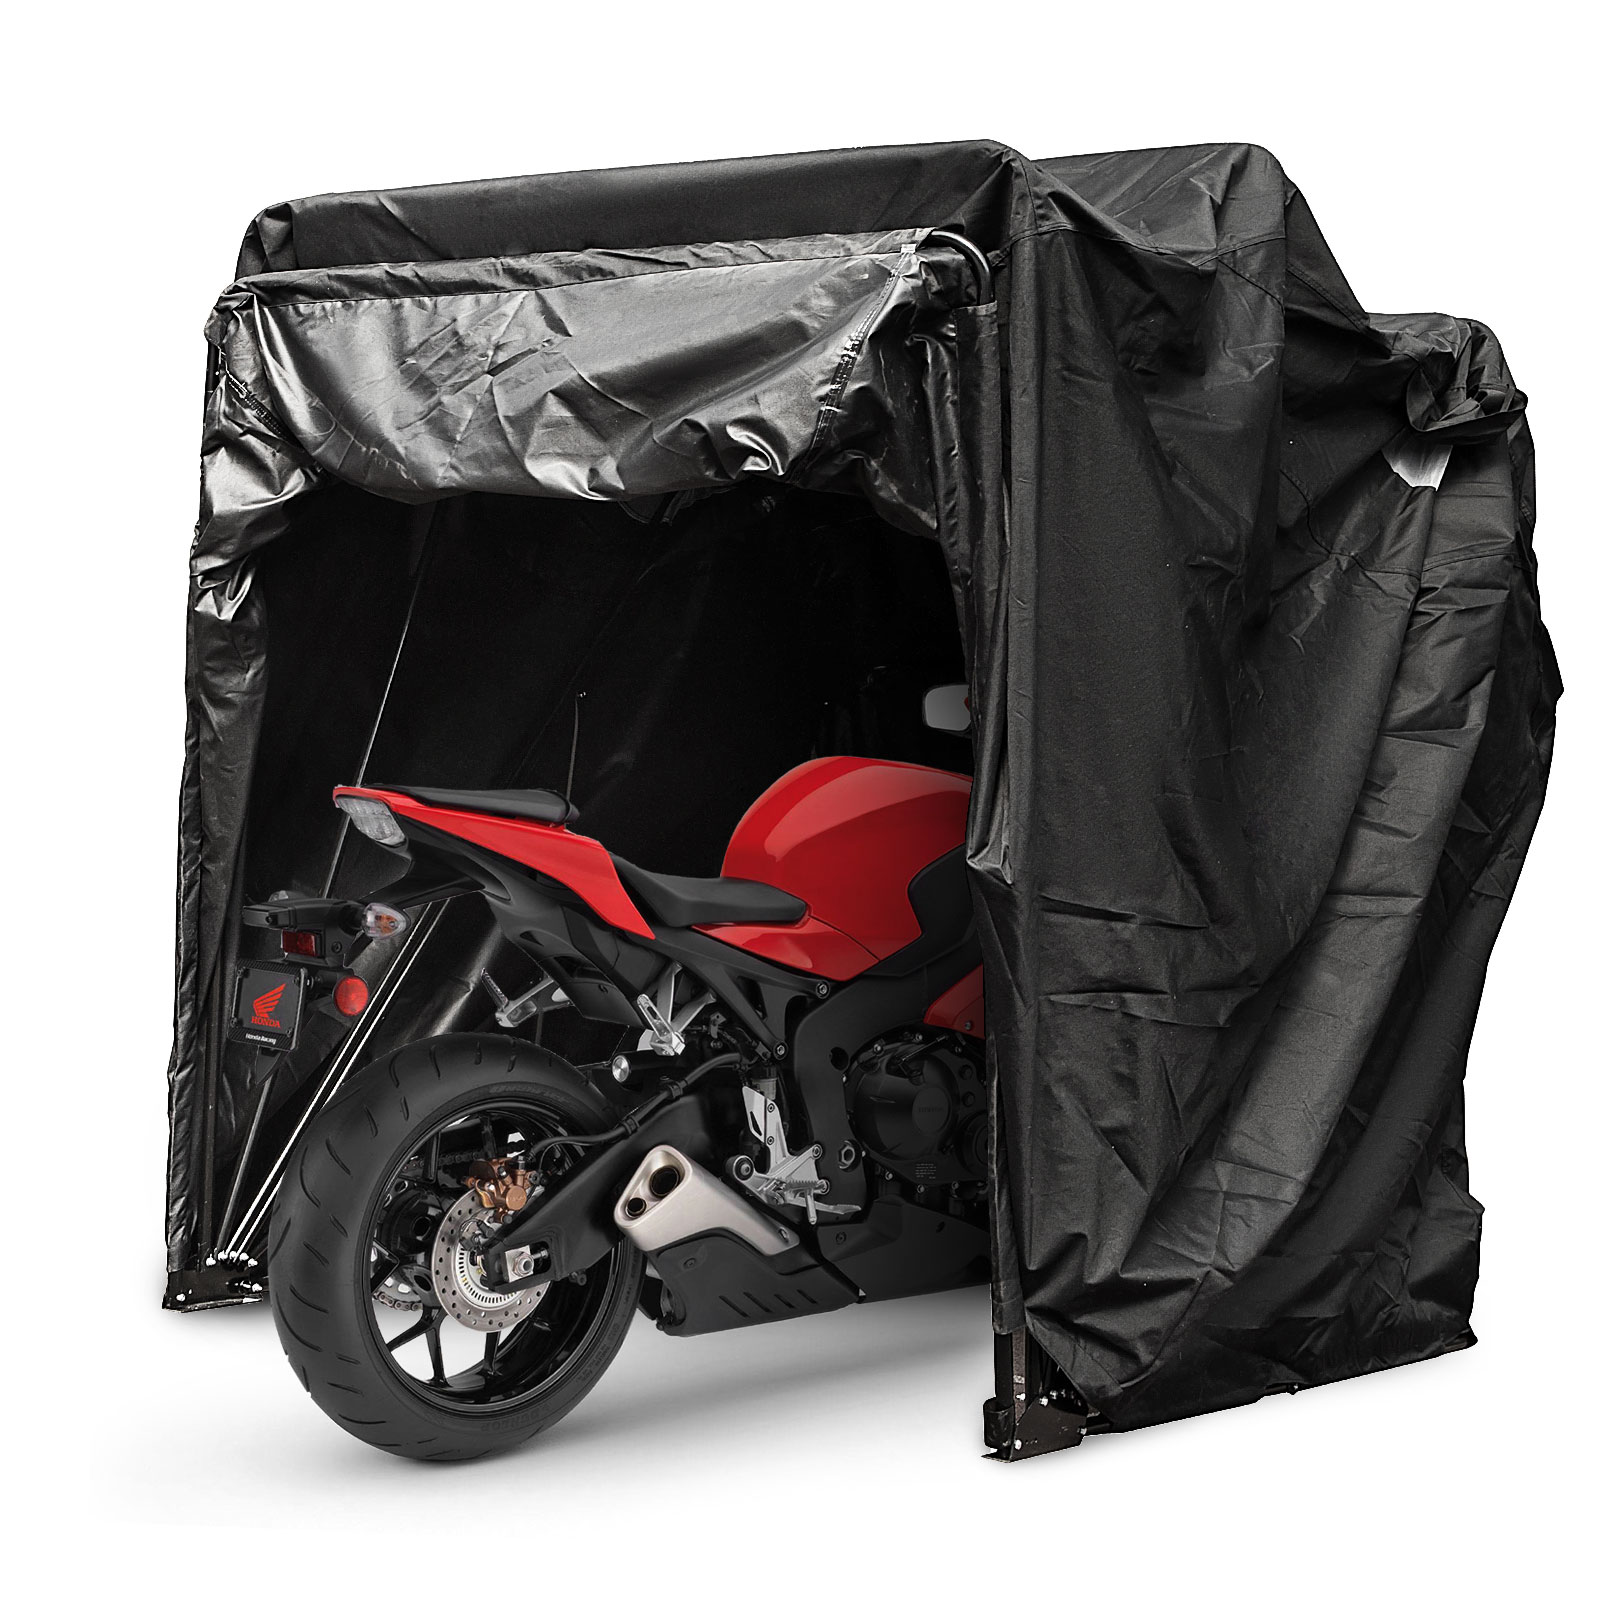 Heavy Duty Large Motorcycle Shelter Shed Cover Storage Tent Strong Safe Garage | eBay